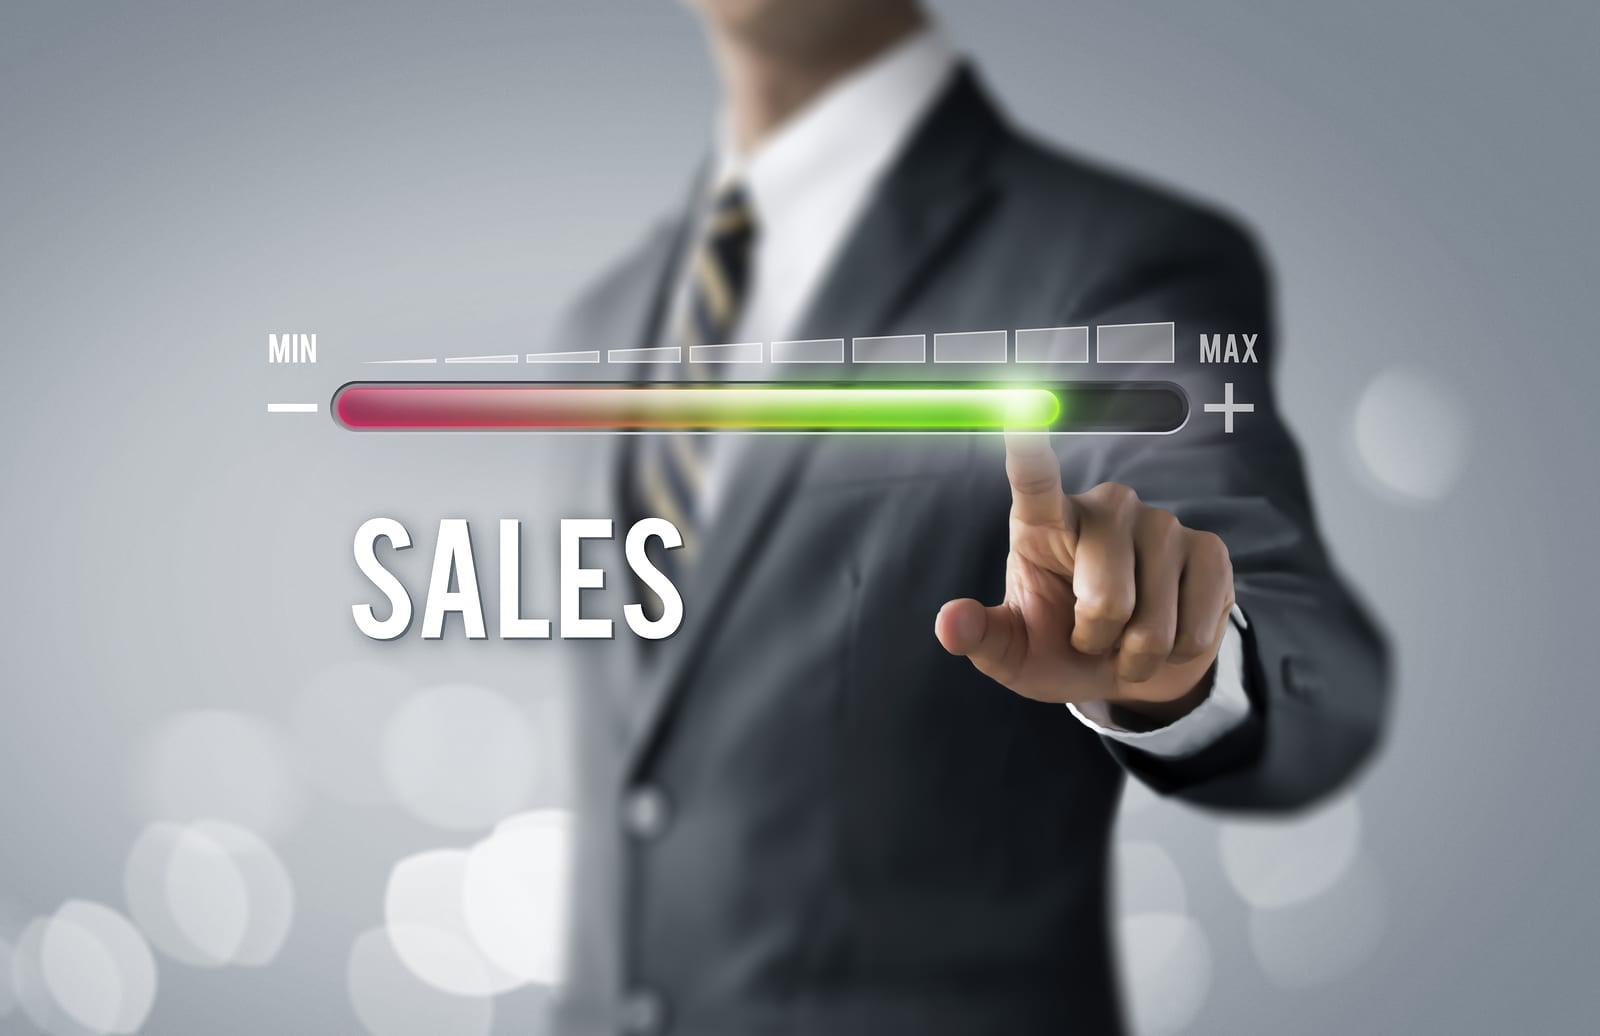 Guarantee increased sales of your products based on principles (1)